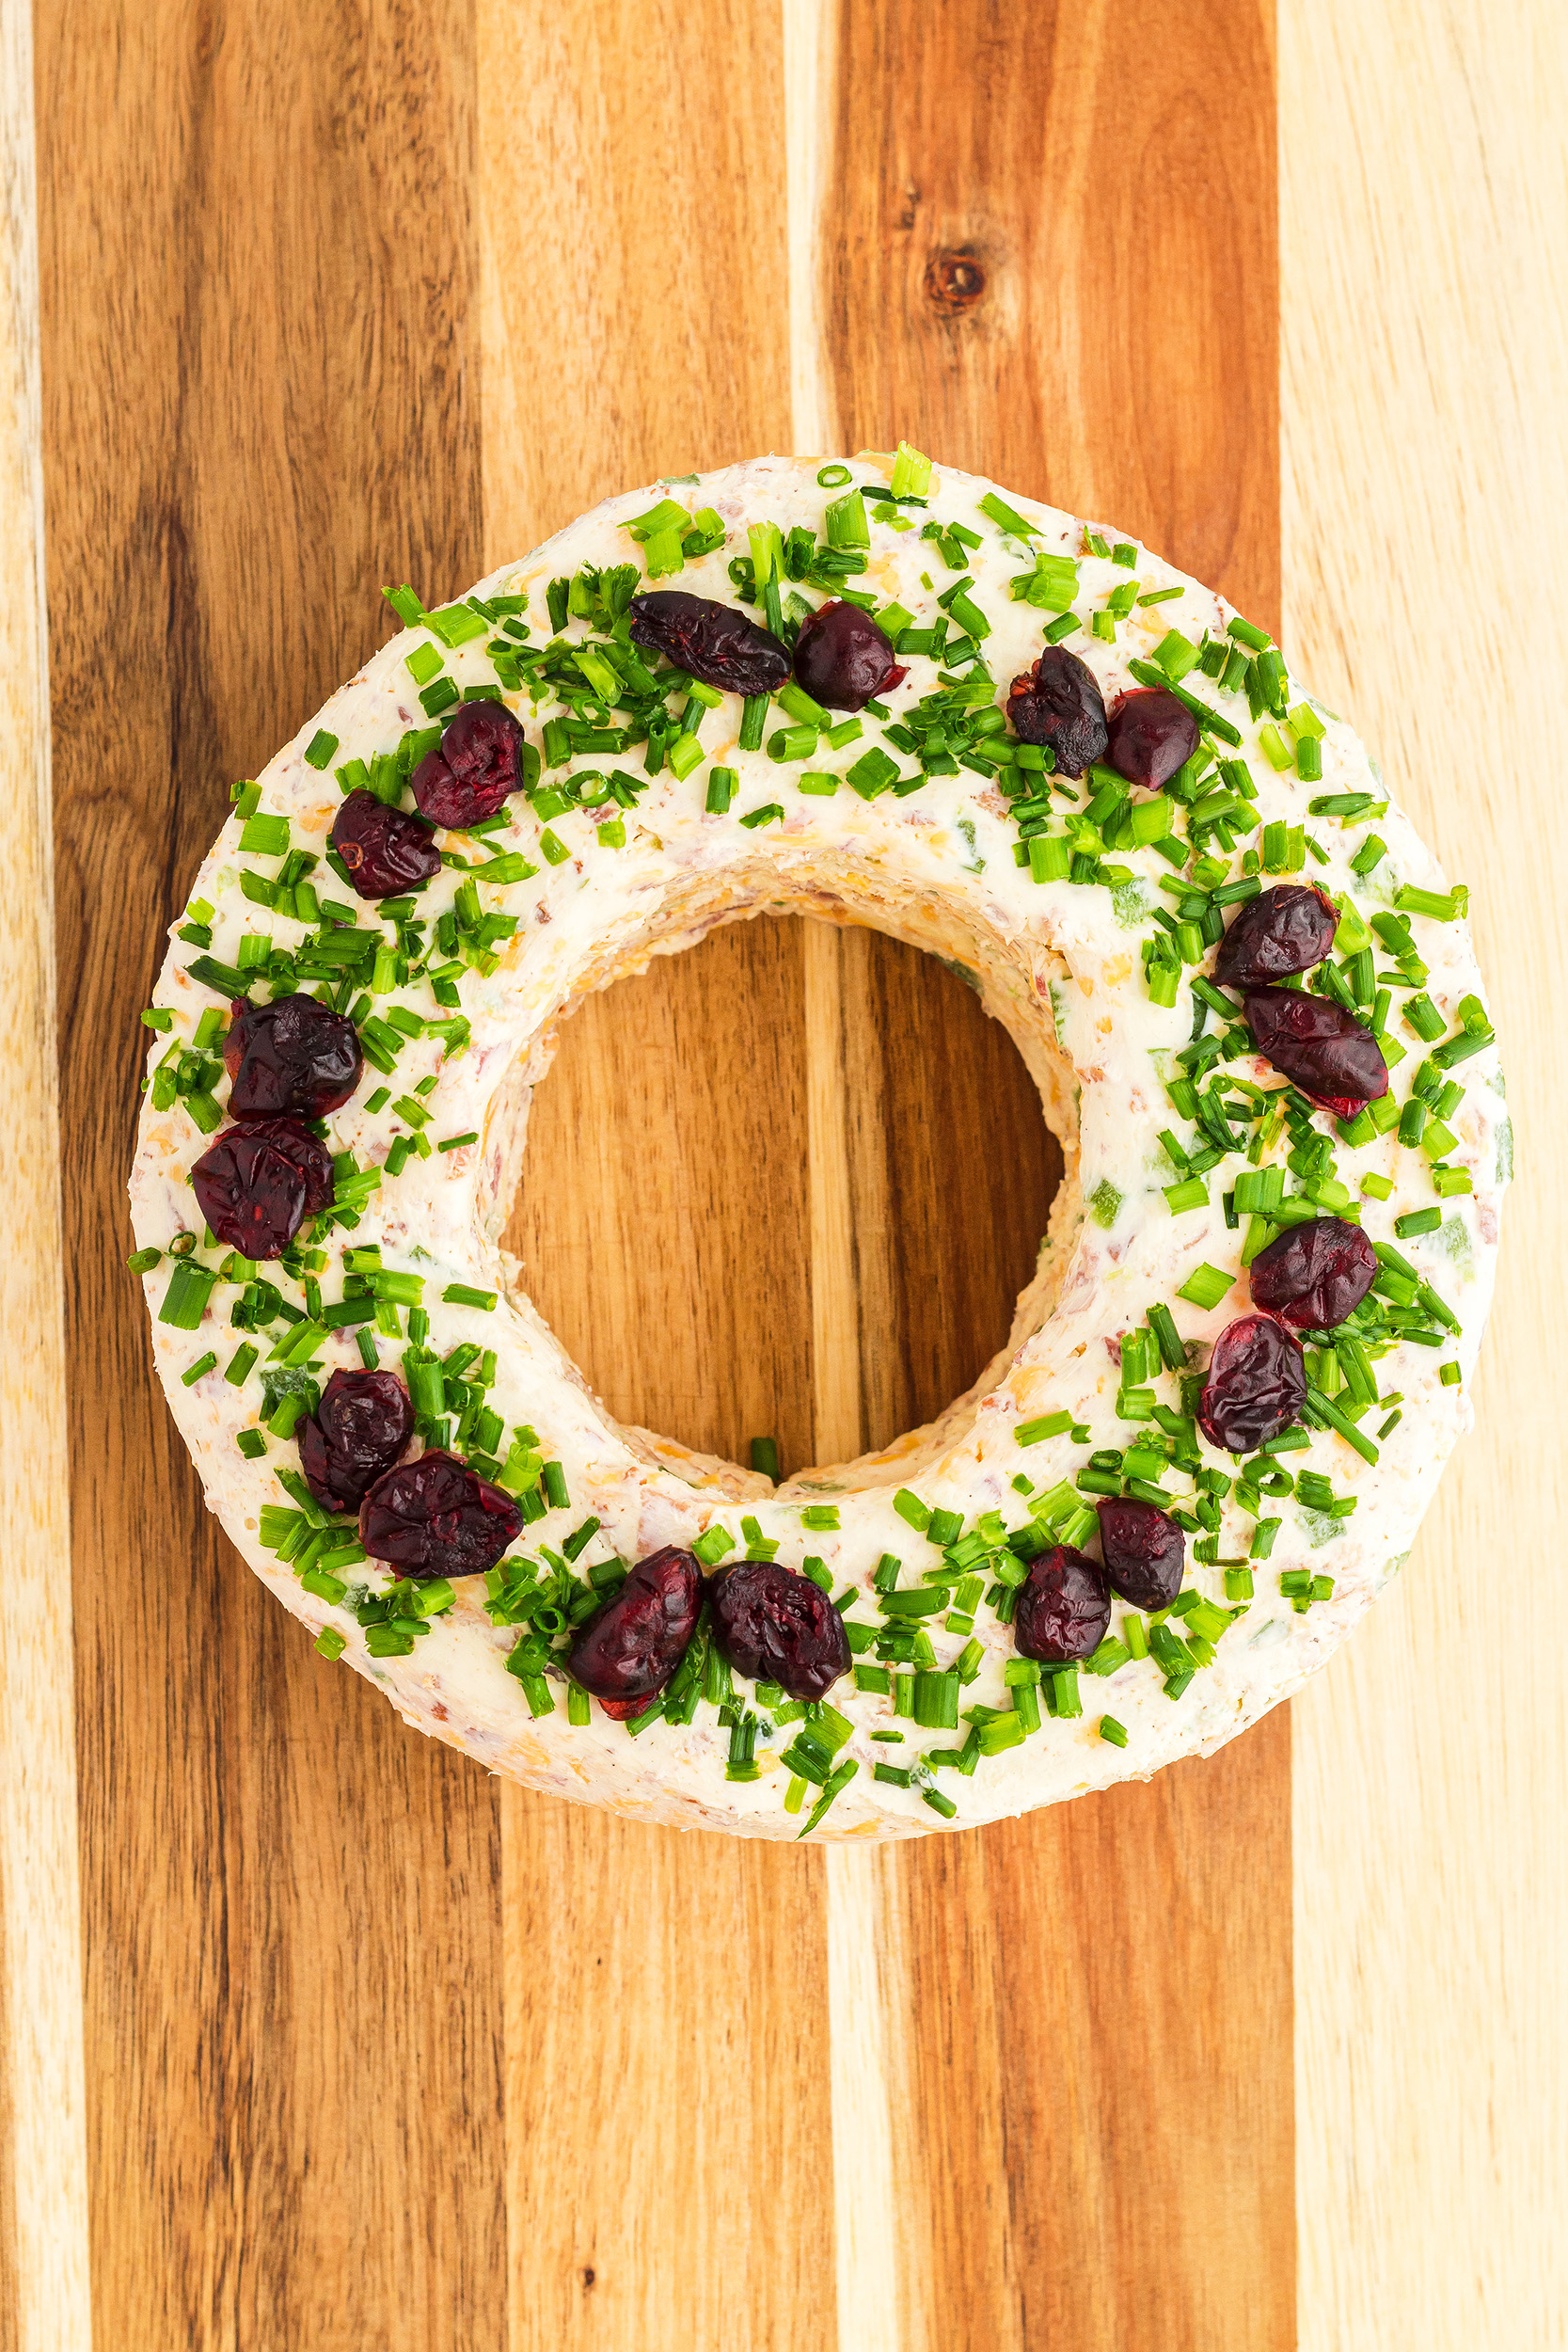 Christmas wreath cheese ball with diced chives and dried cranberries pressed into the top of the wreath